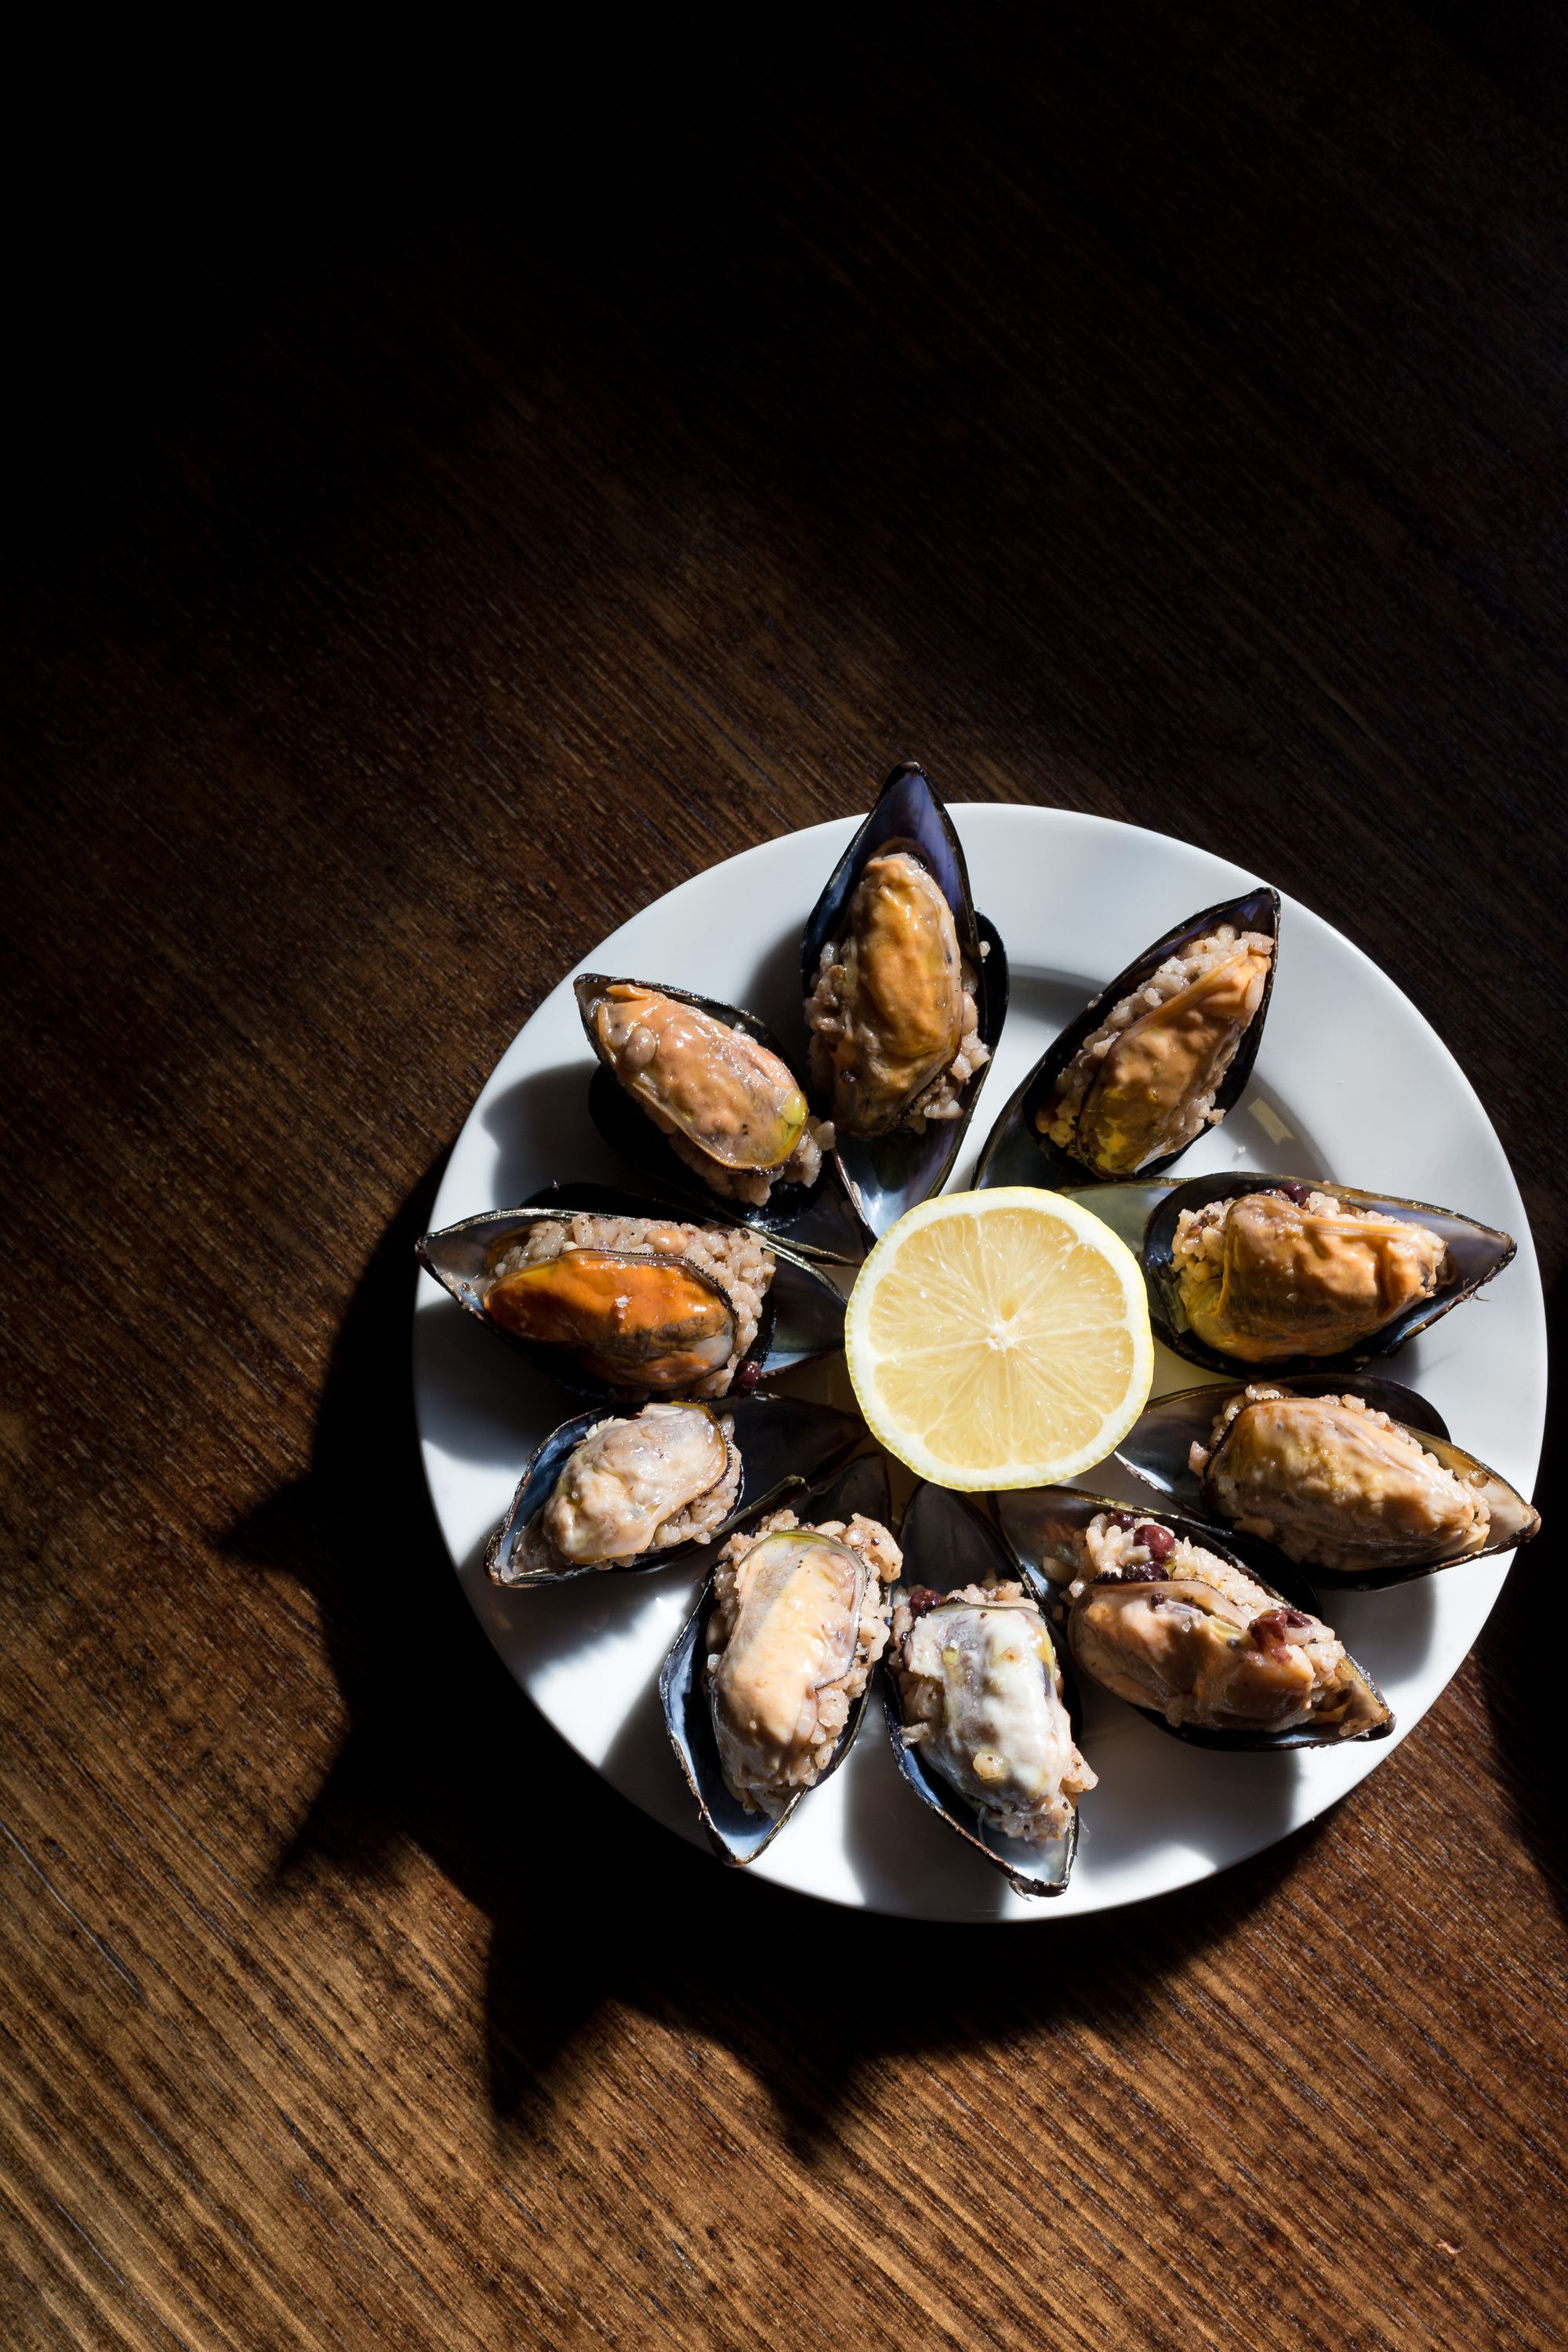 Try this amazing stuffed mussels recipe from Chef Ibrahim Kasif. It won't disappoint.